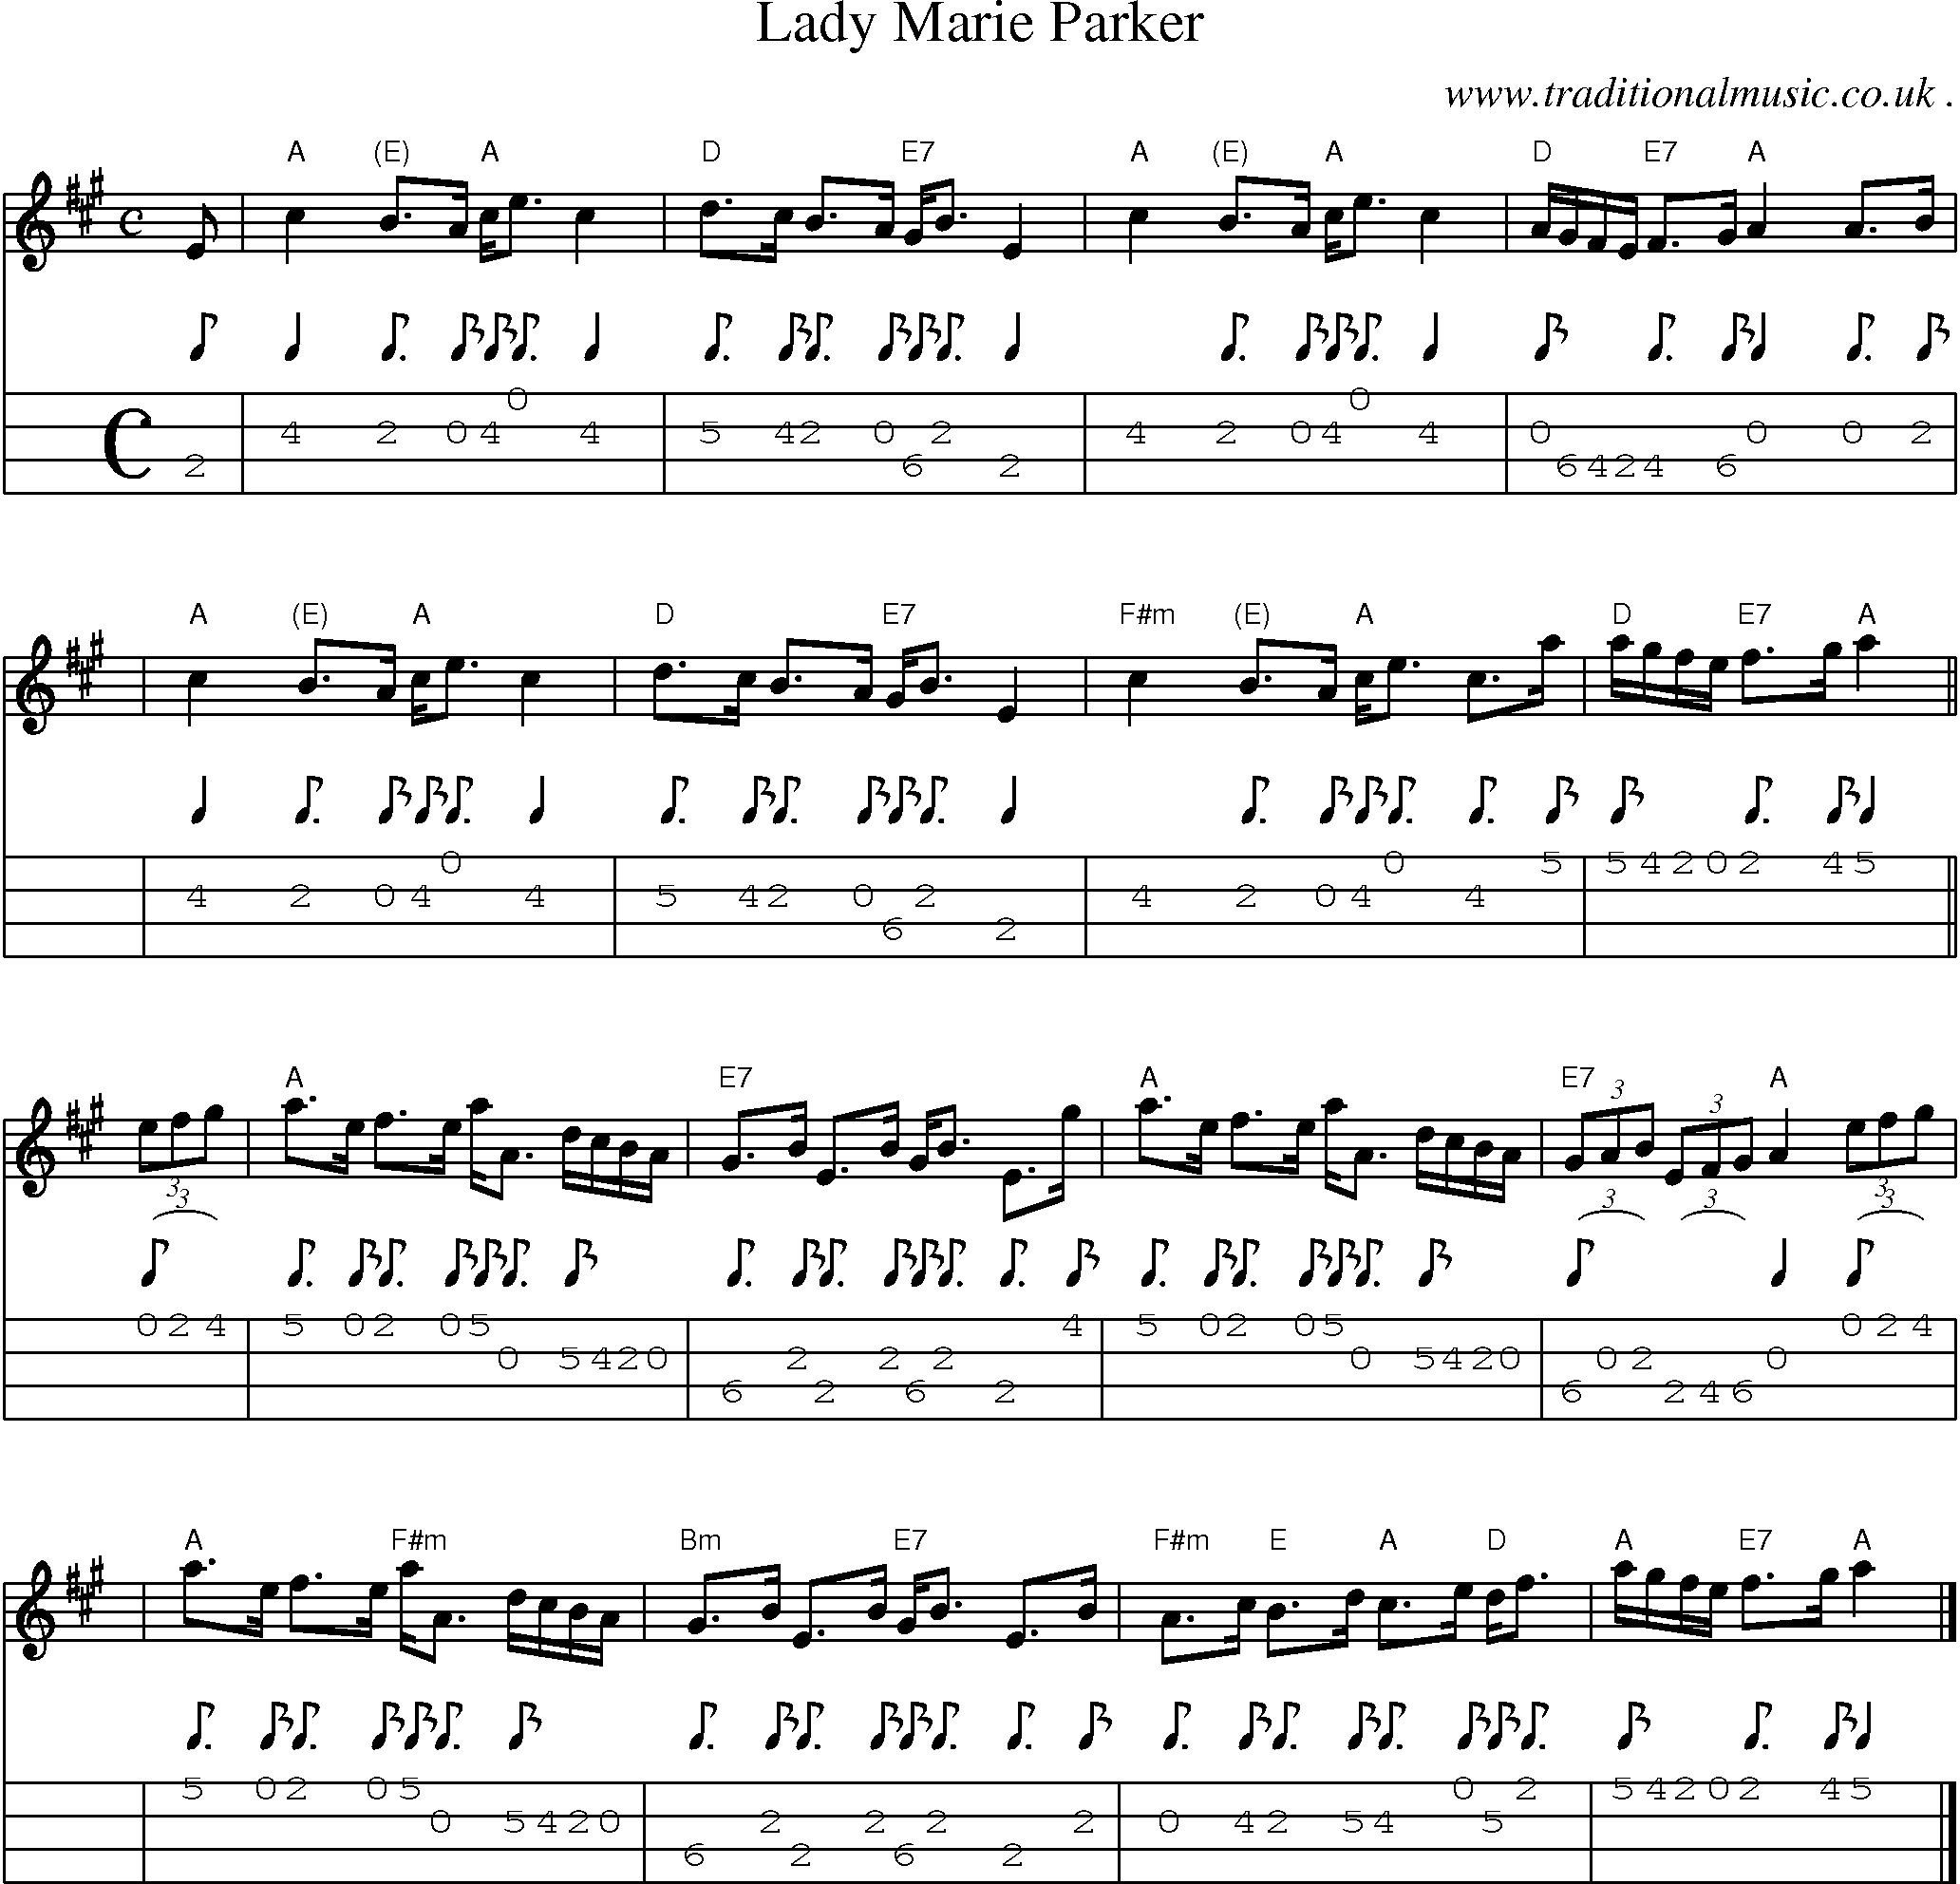 Sheet-music  score, Chords and Mandolin Tabs for Lady Marie Parker